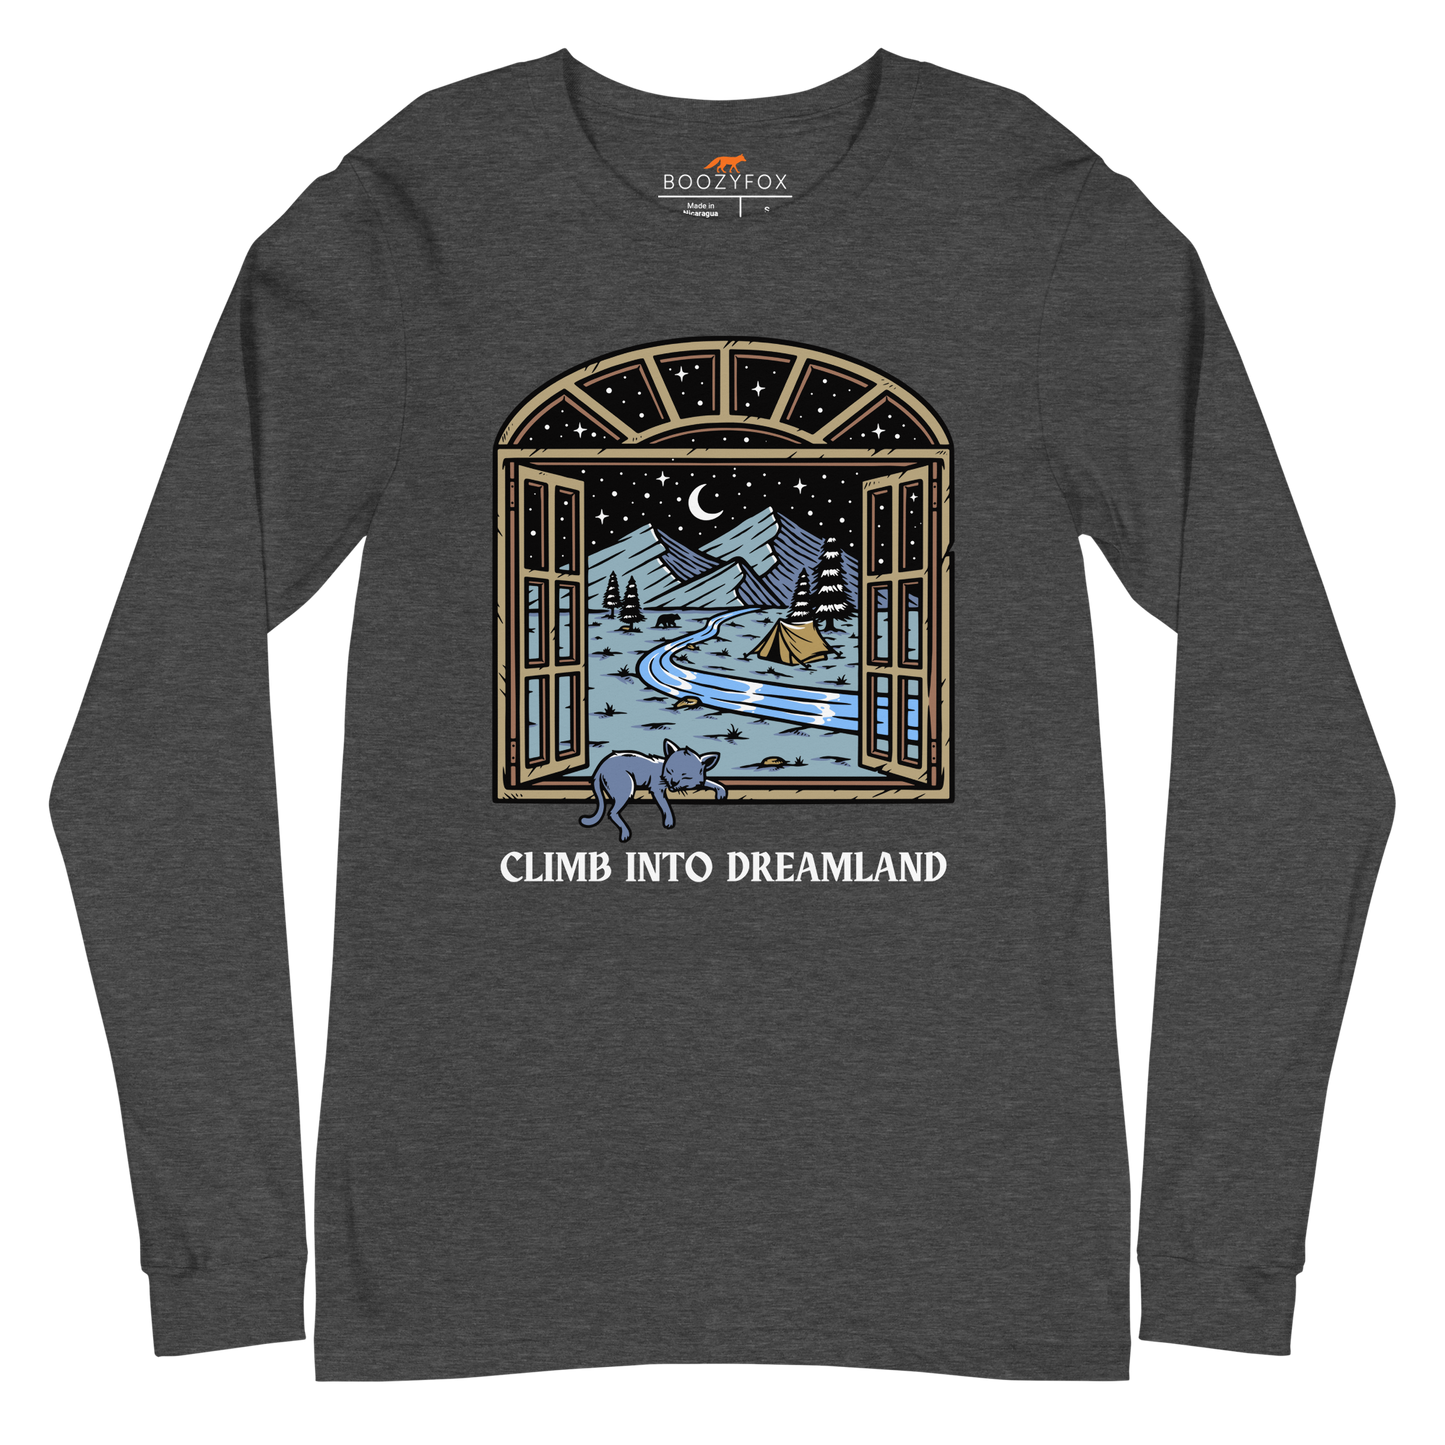 Dark Grey Heather Climb Into Dreamland Long Sleeve Tee featuring a mesmerizing mountain view graphic on the chest - Cool Nature Long Sleeve Graphic Tees - Boozy Fox